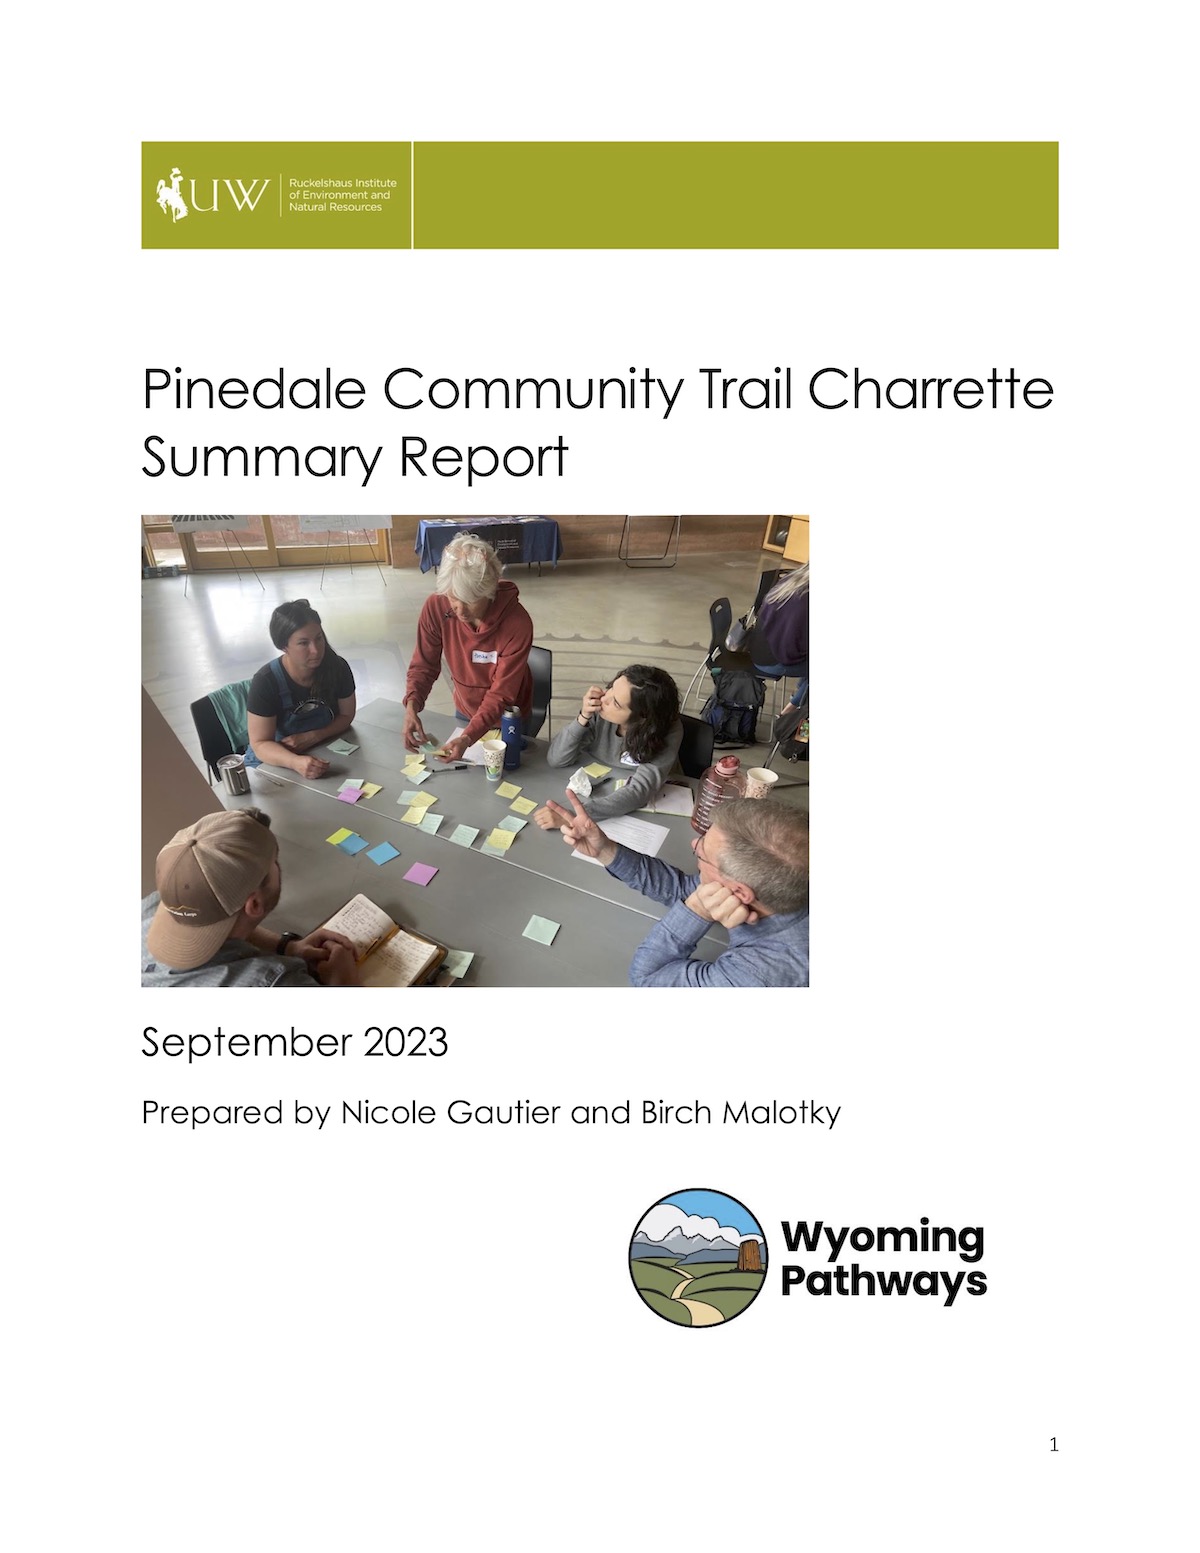 Cover of Pinedale Community Trail Charrette Summary Report with image of people gathered around a table using sticky notes.